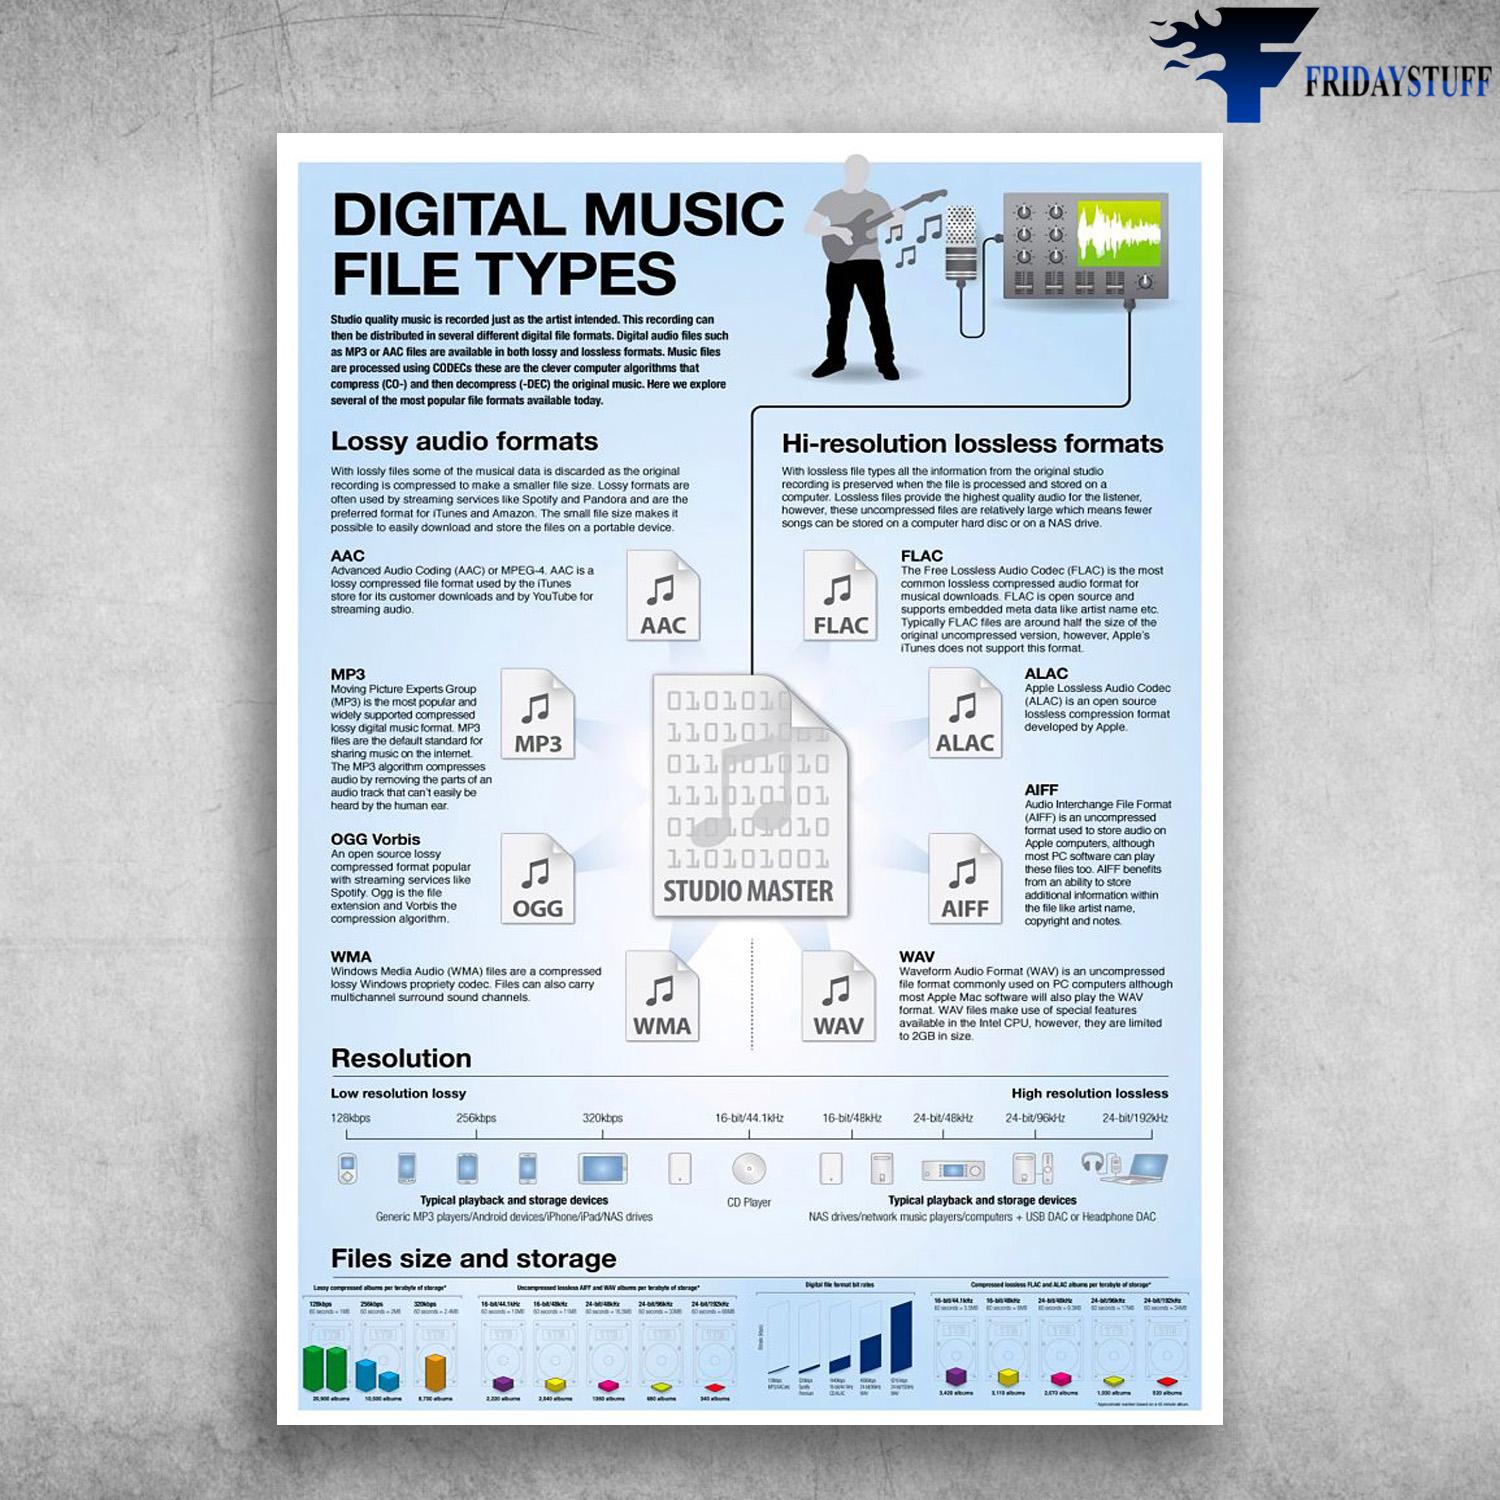 Digital Music File Types, Lossy Audio Formats, Hi-resolution Lossless Formats, Files Size And Storage